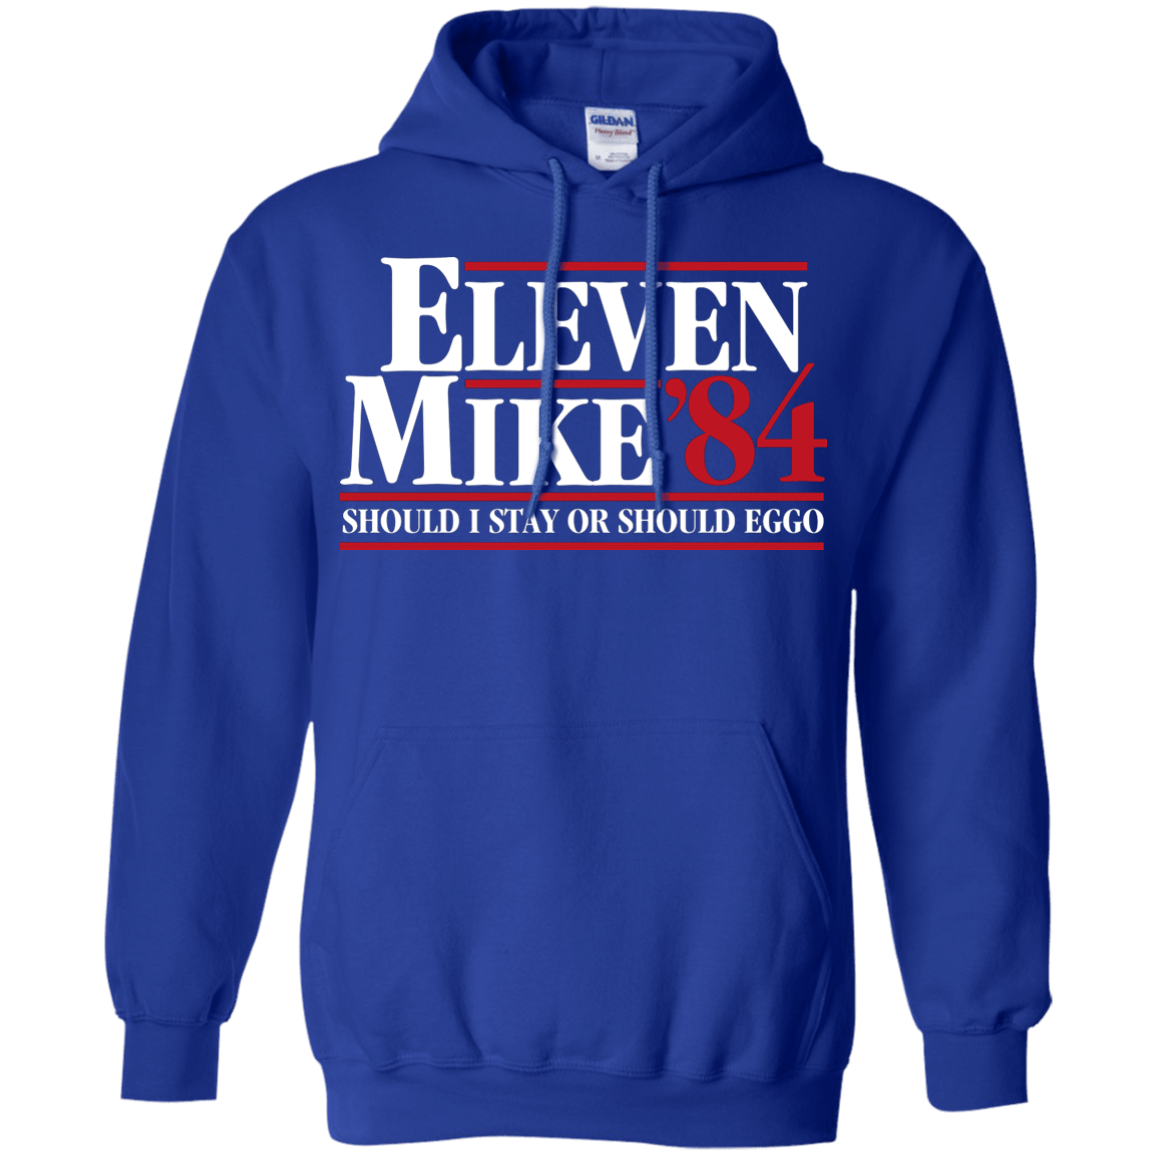 Sweatshirts Royal / Small Eleven Mike 84 - Should I Stay or Should Eggo Pullover Hoodie